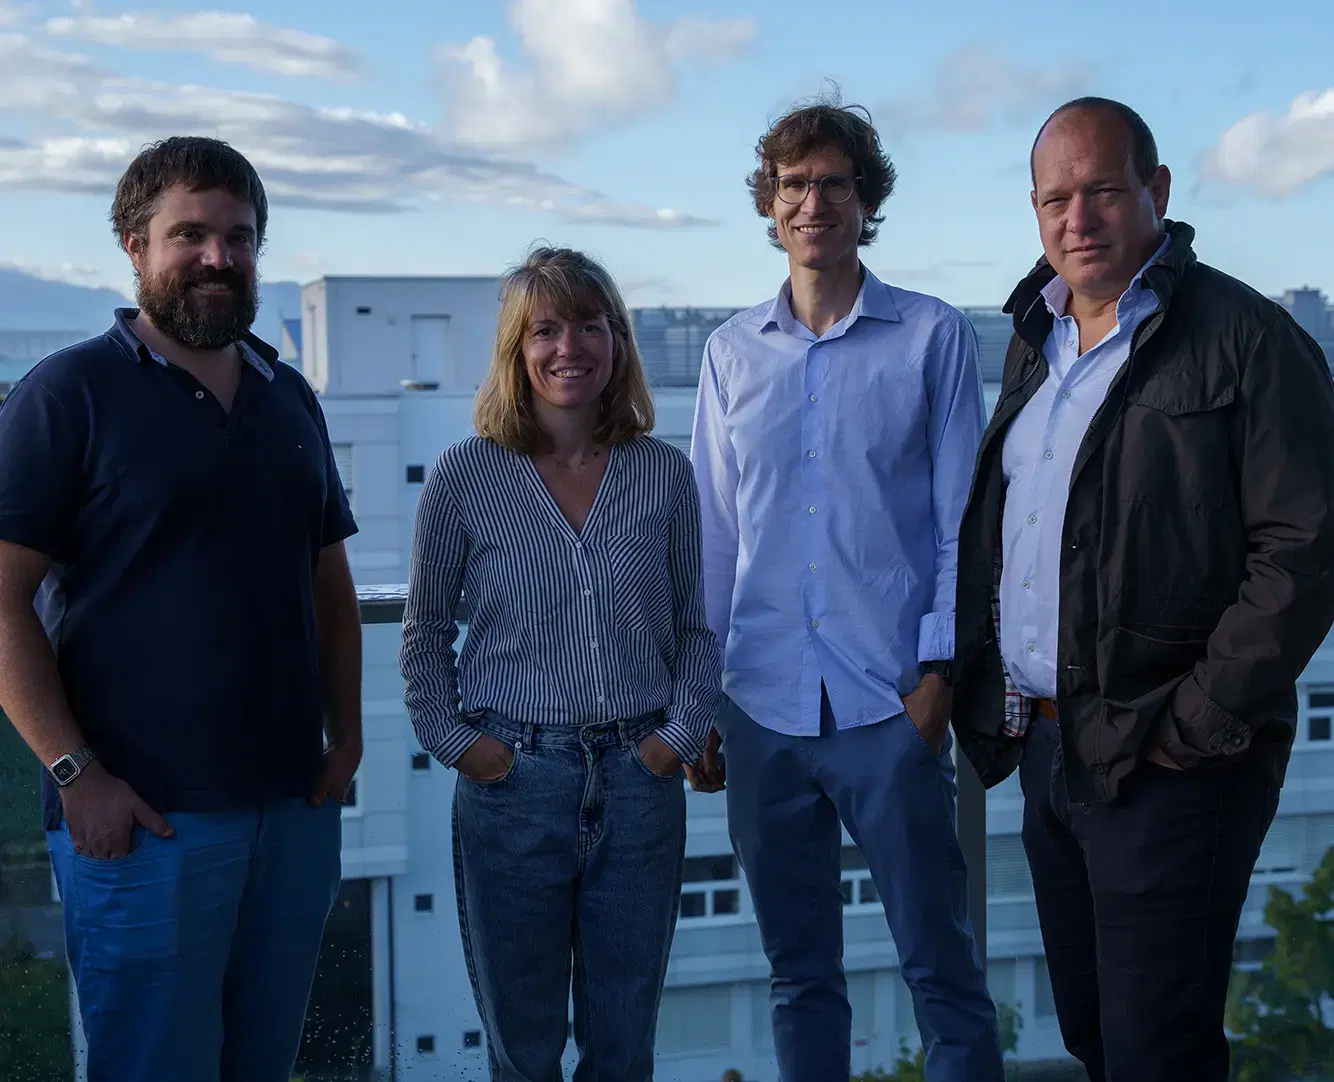 The core of Darwin Digital team - From right to left, DAniel Kaempf, Javier Dominguez, Pauline Balan and Marc-Antoine Cloux